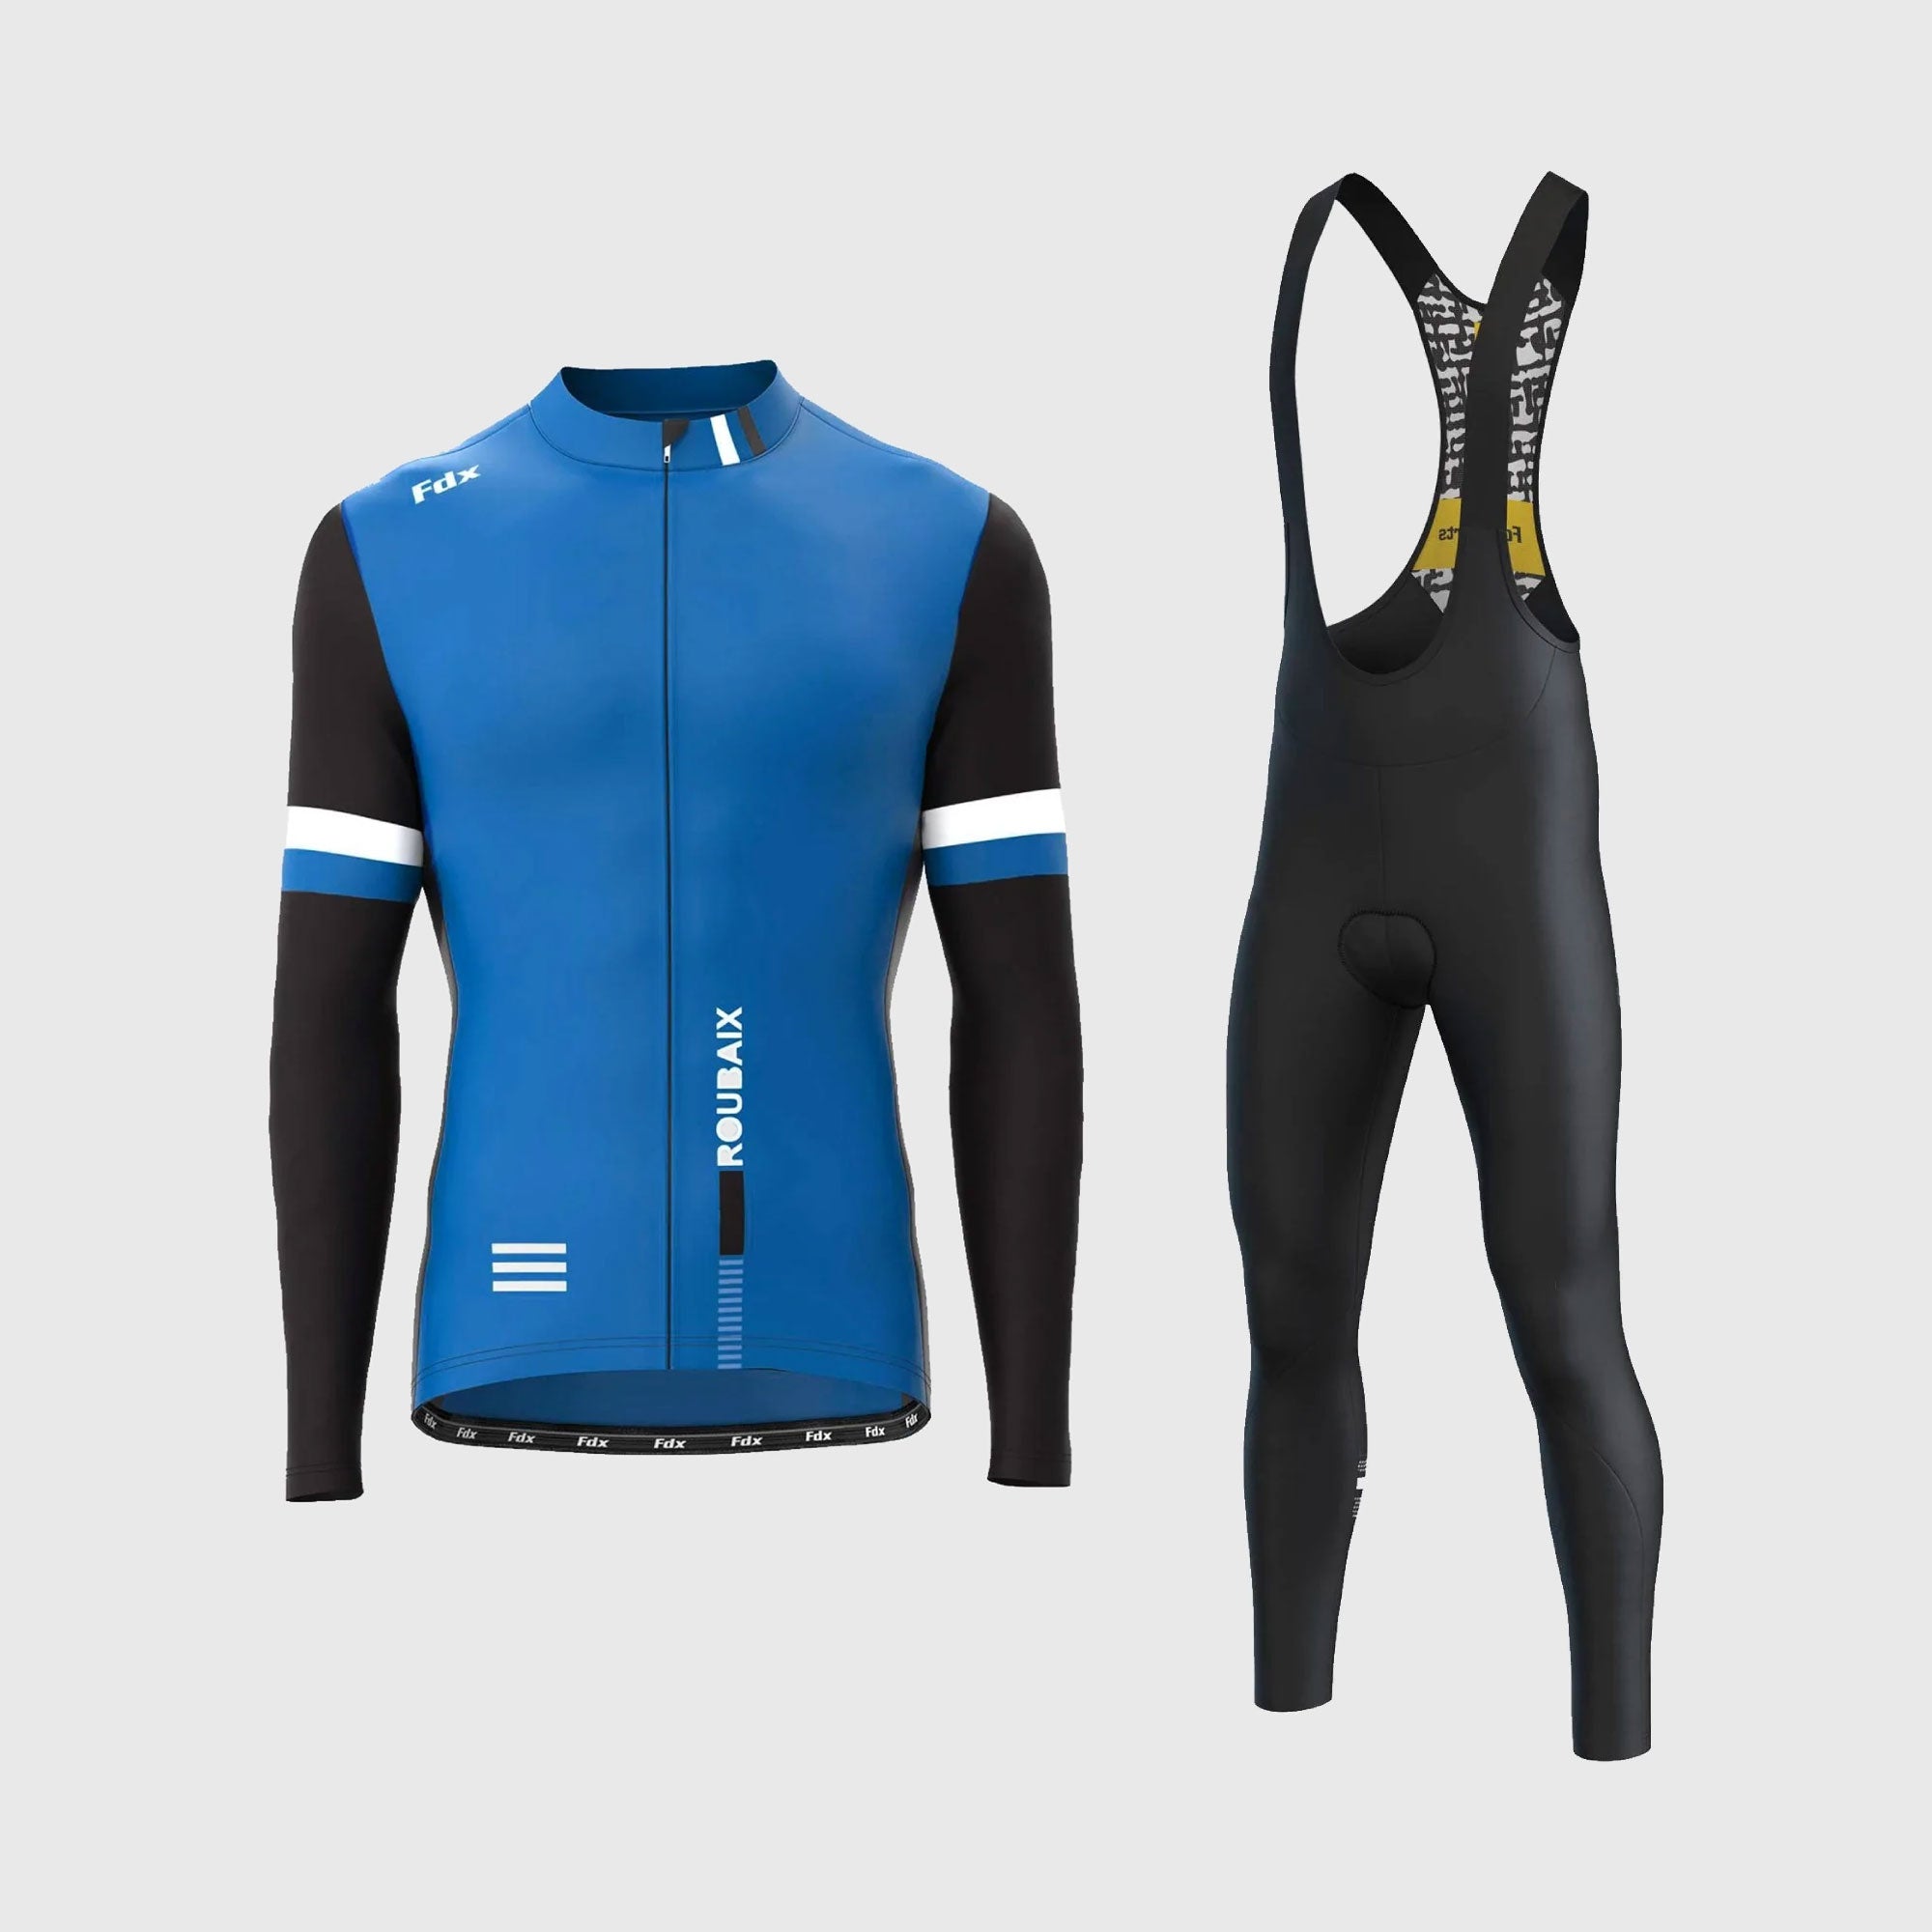 Fdx Men's Set Limited Edition Thermal Roubaix Long Sleeve Cycling Jersey & Bib Tights - Blue